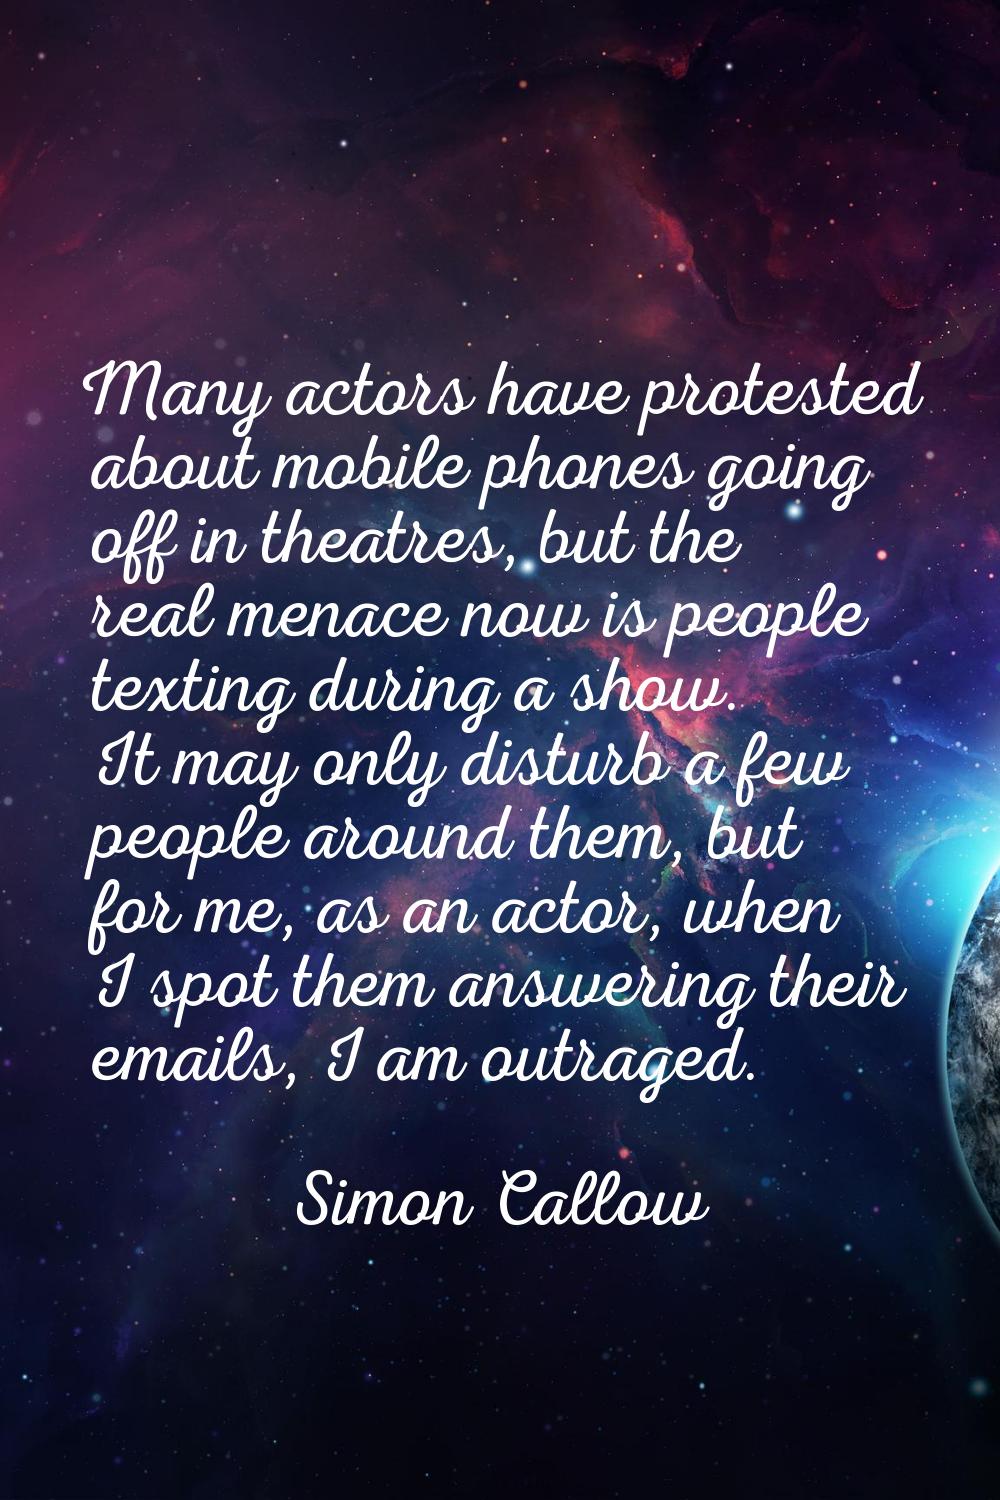 Many actors have protested about mobile phones going off in theatres, but the real menace now is pe